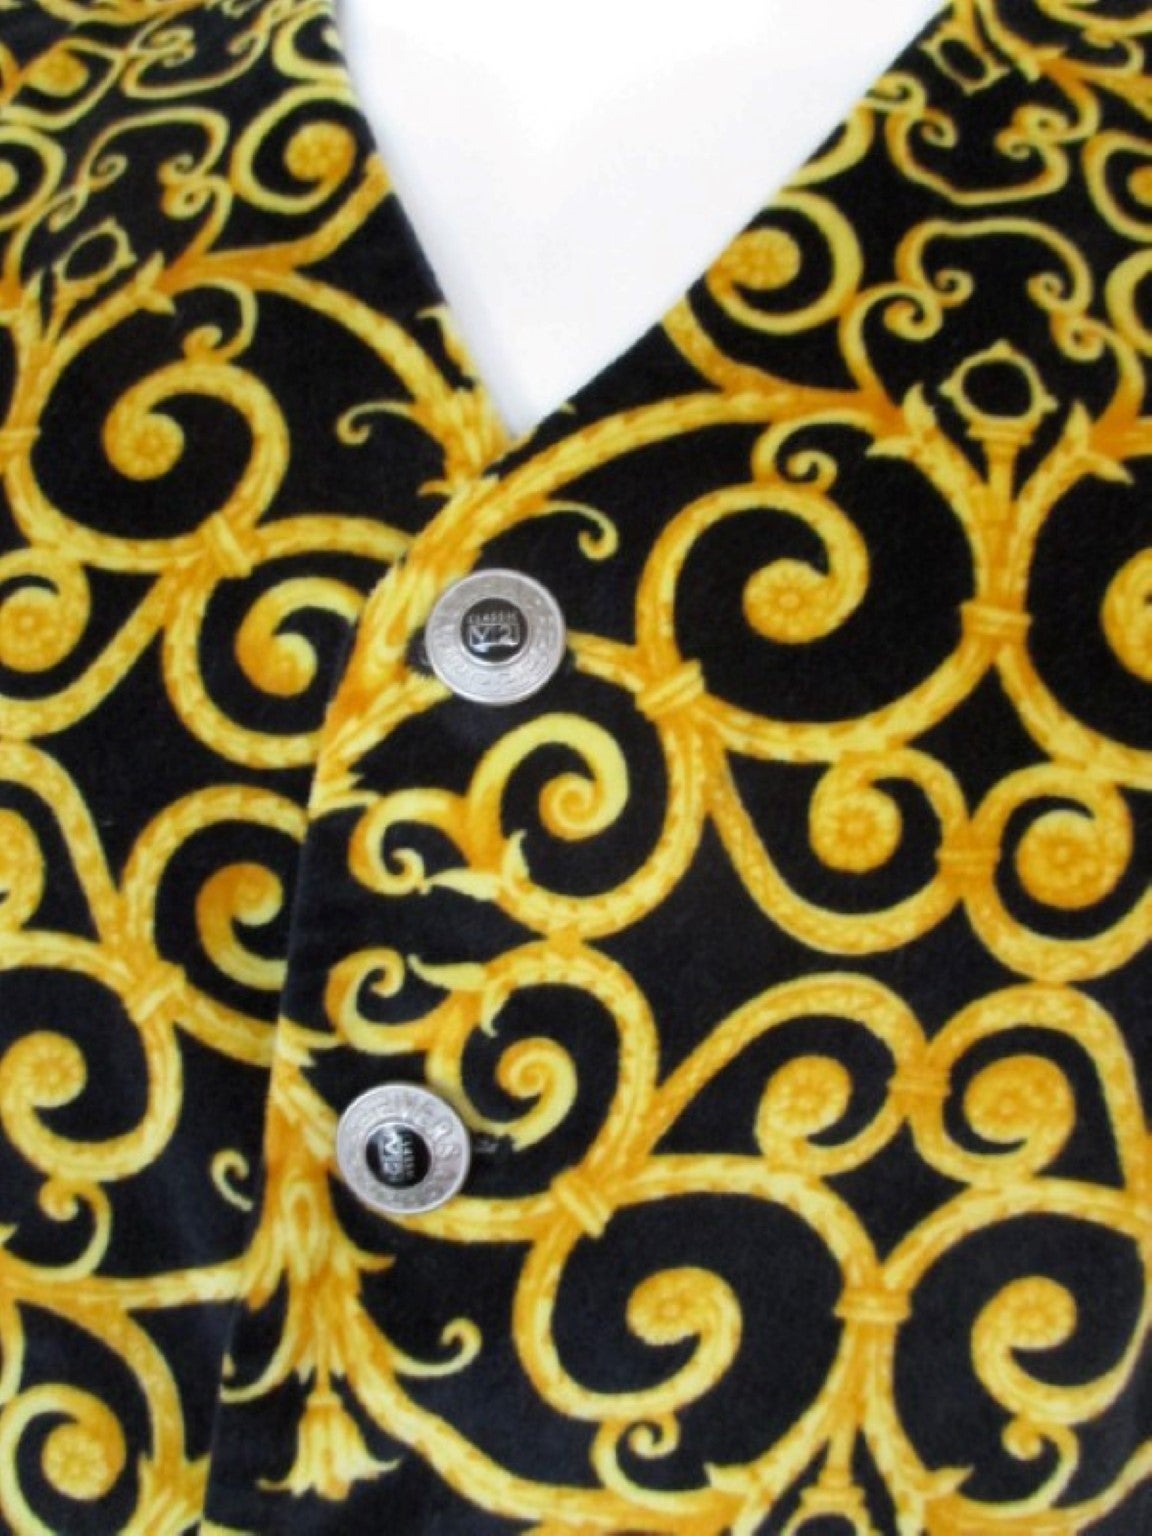 Extremely rare Gianni Versace Men's Vest in Baroque Print with iconic Medusa buttons. 
Versace Classic V2 collection.